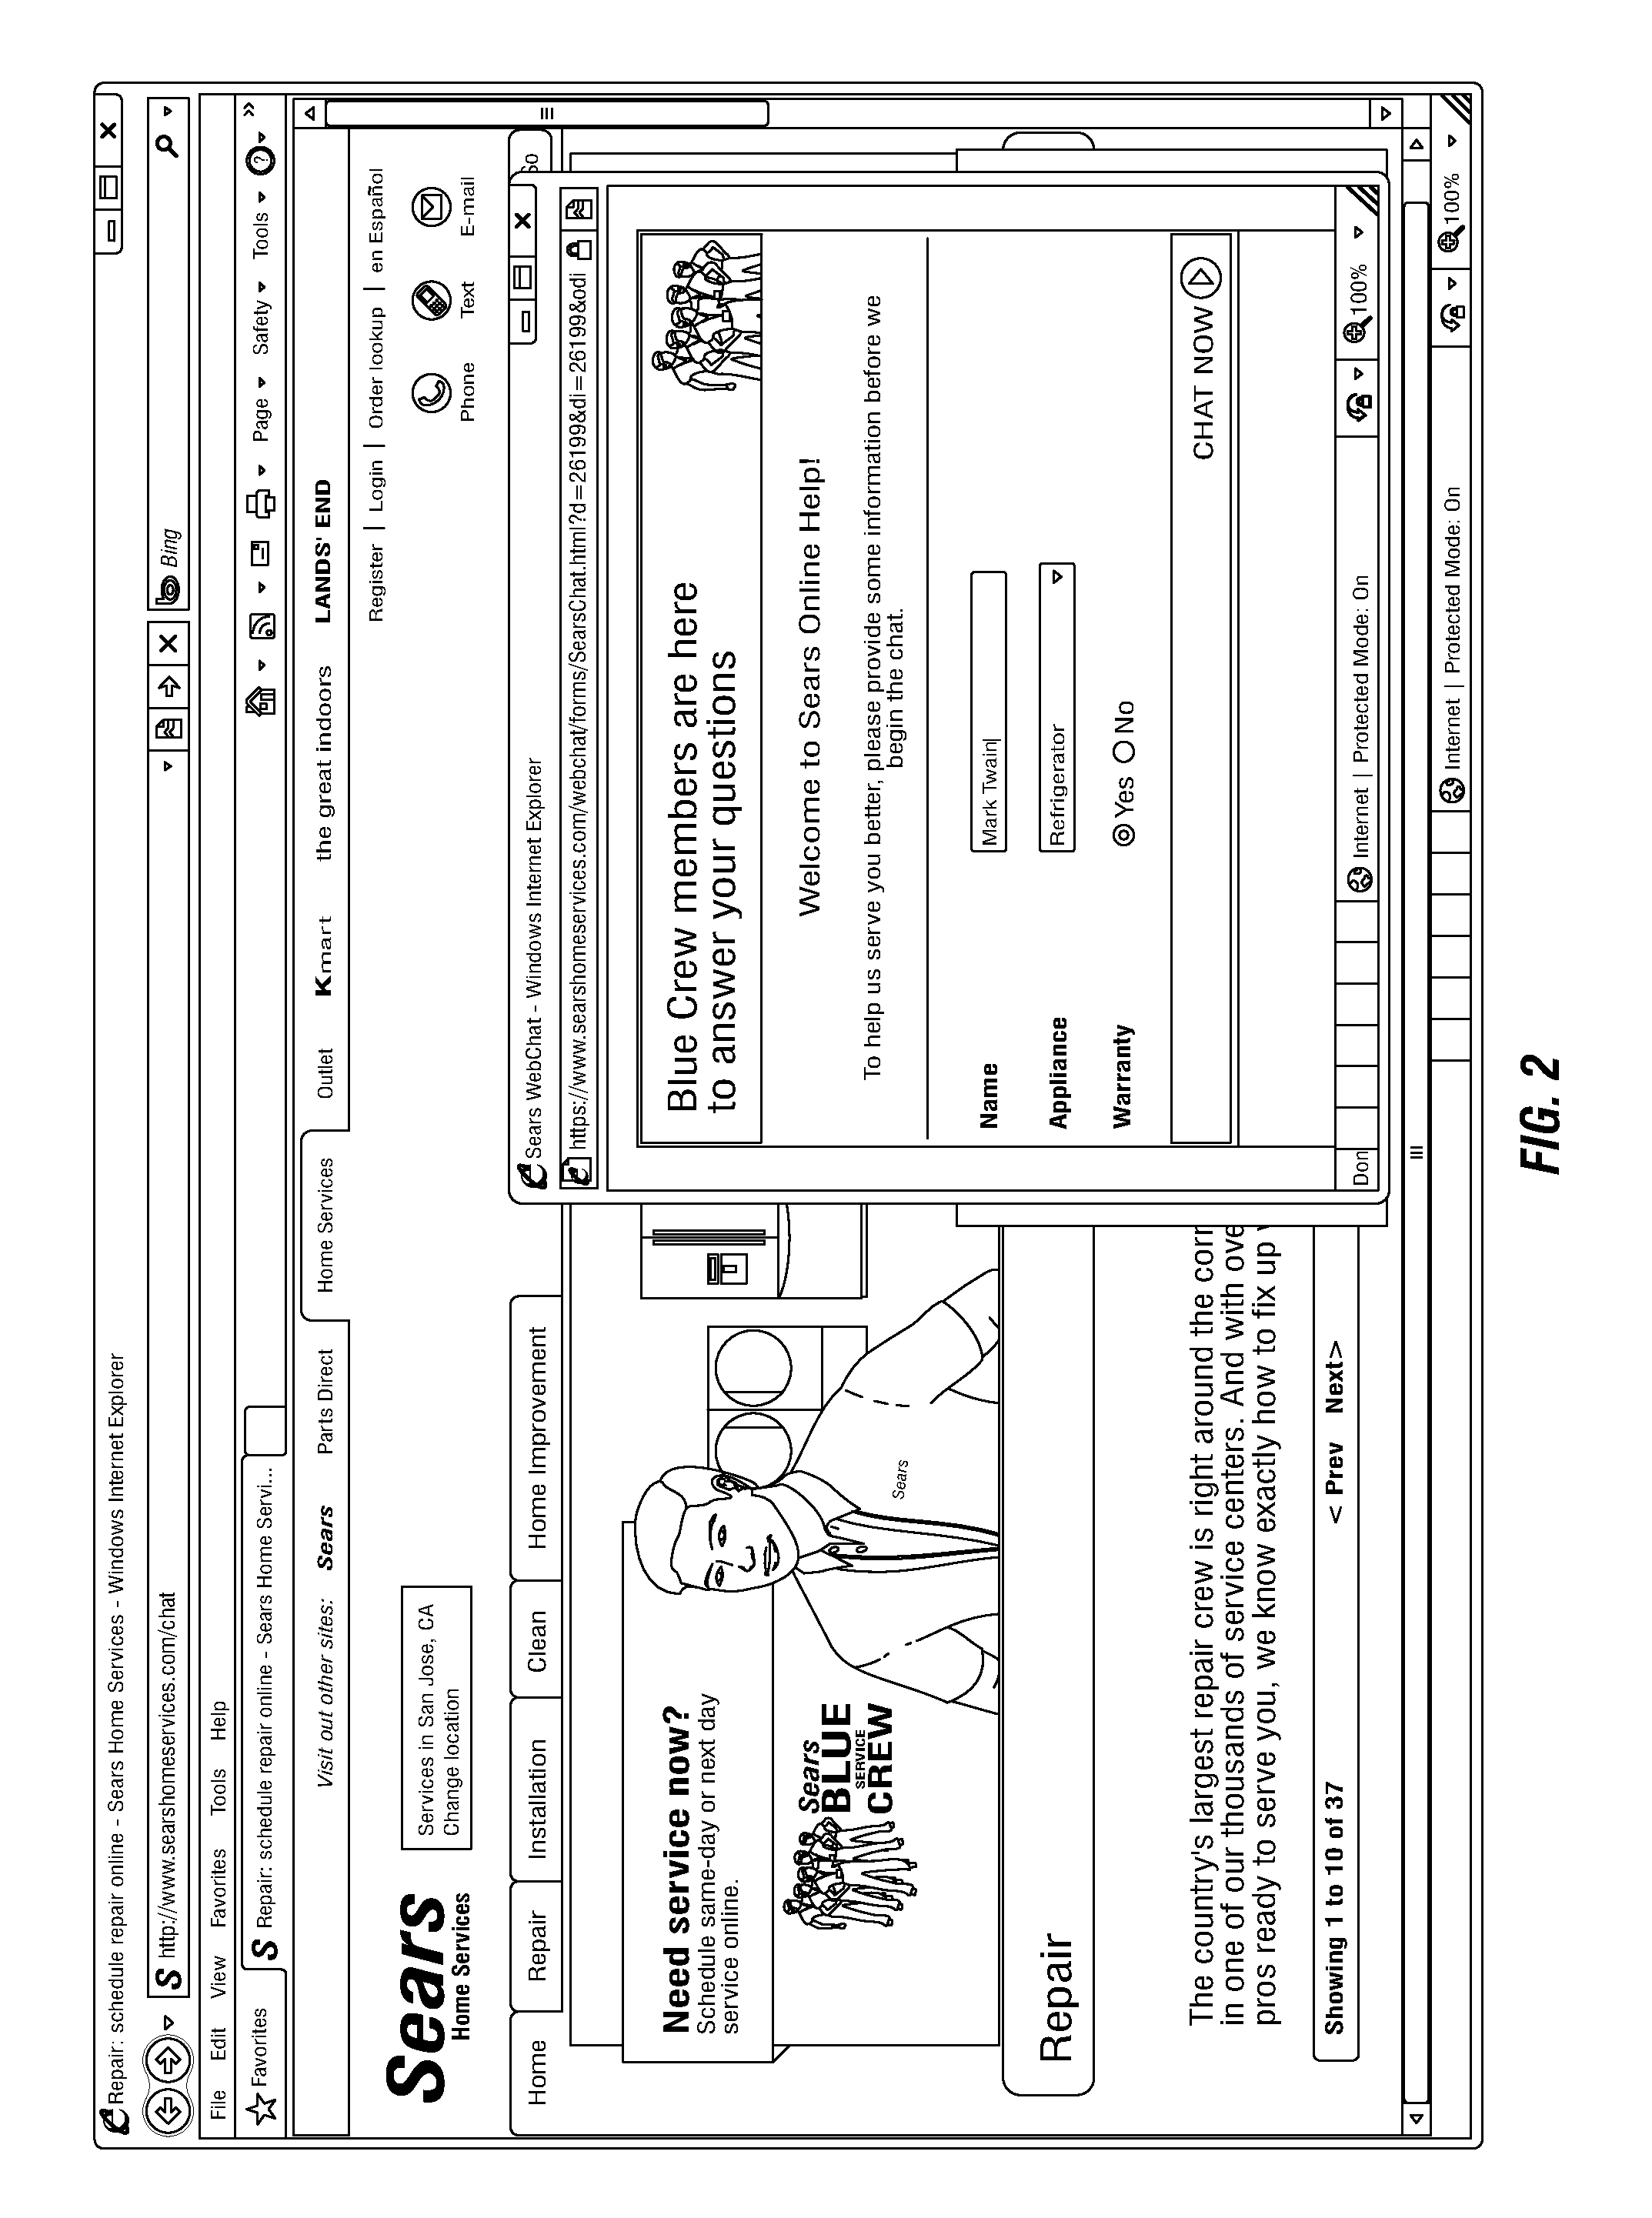 Method and apparatus for optimizing customer service across multiple channels